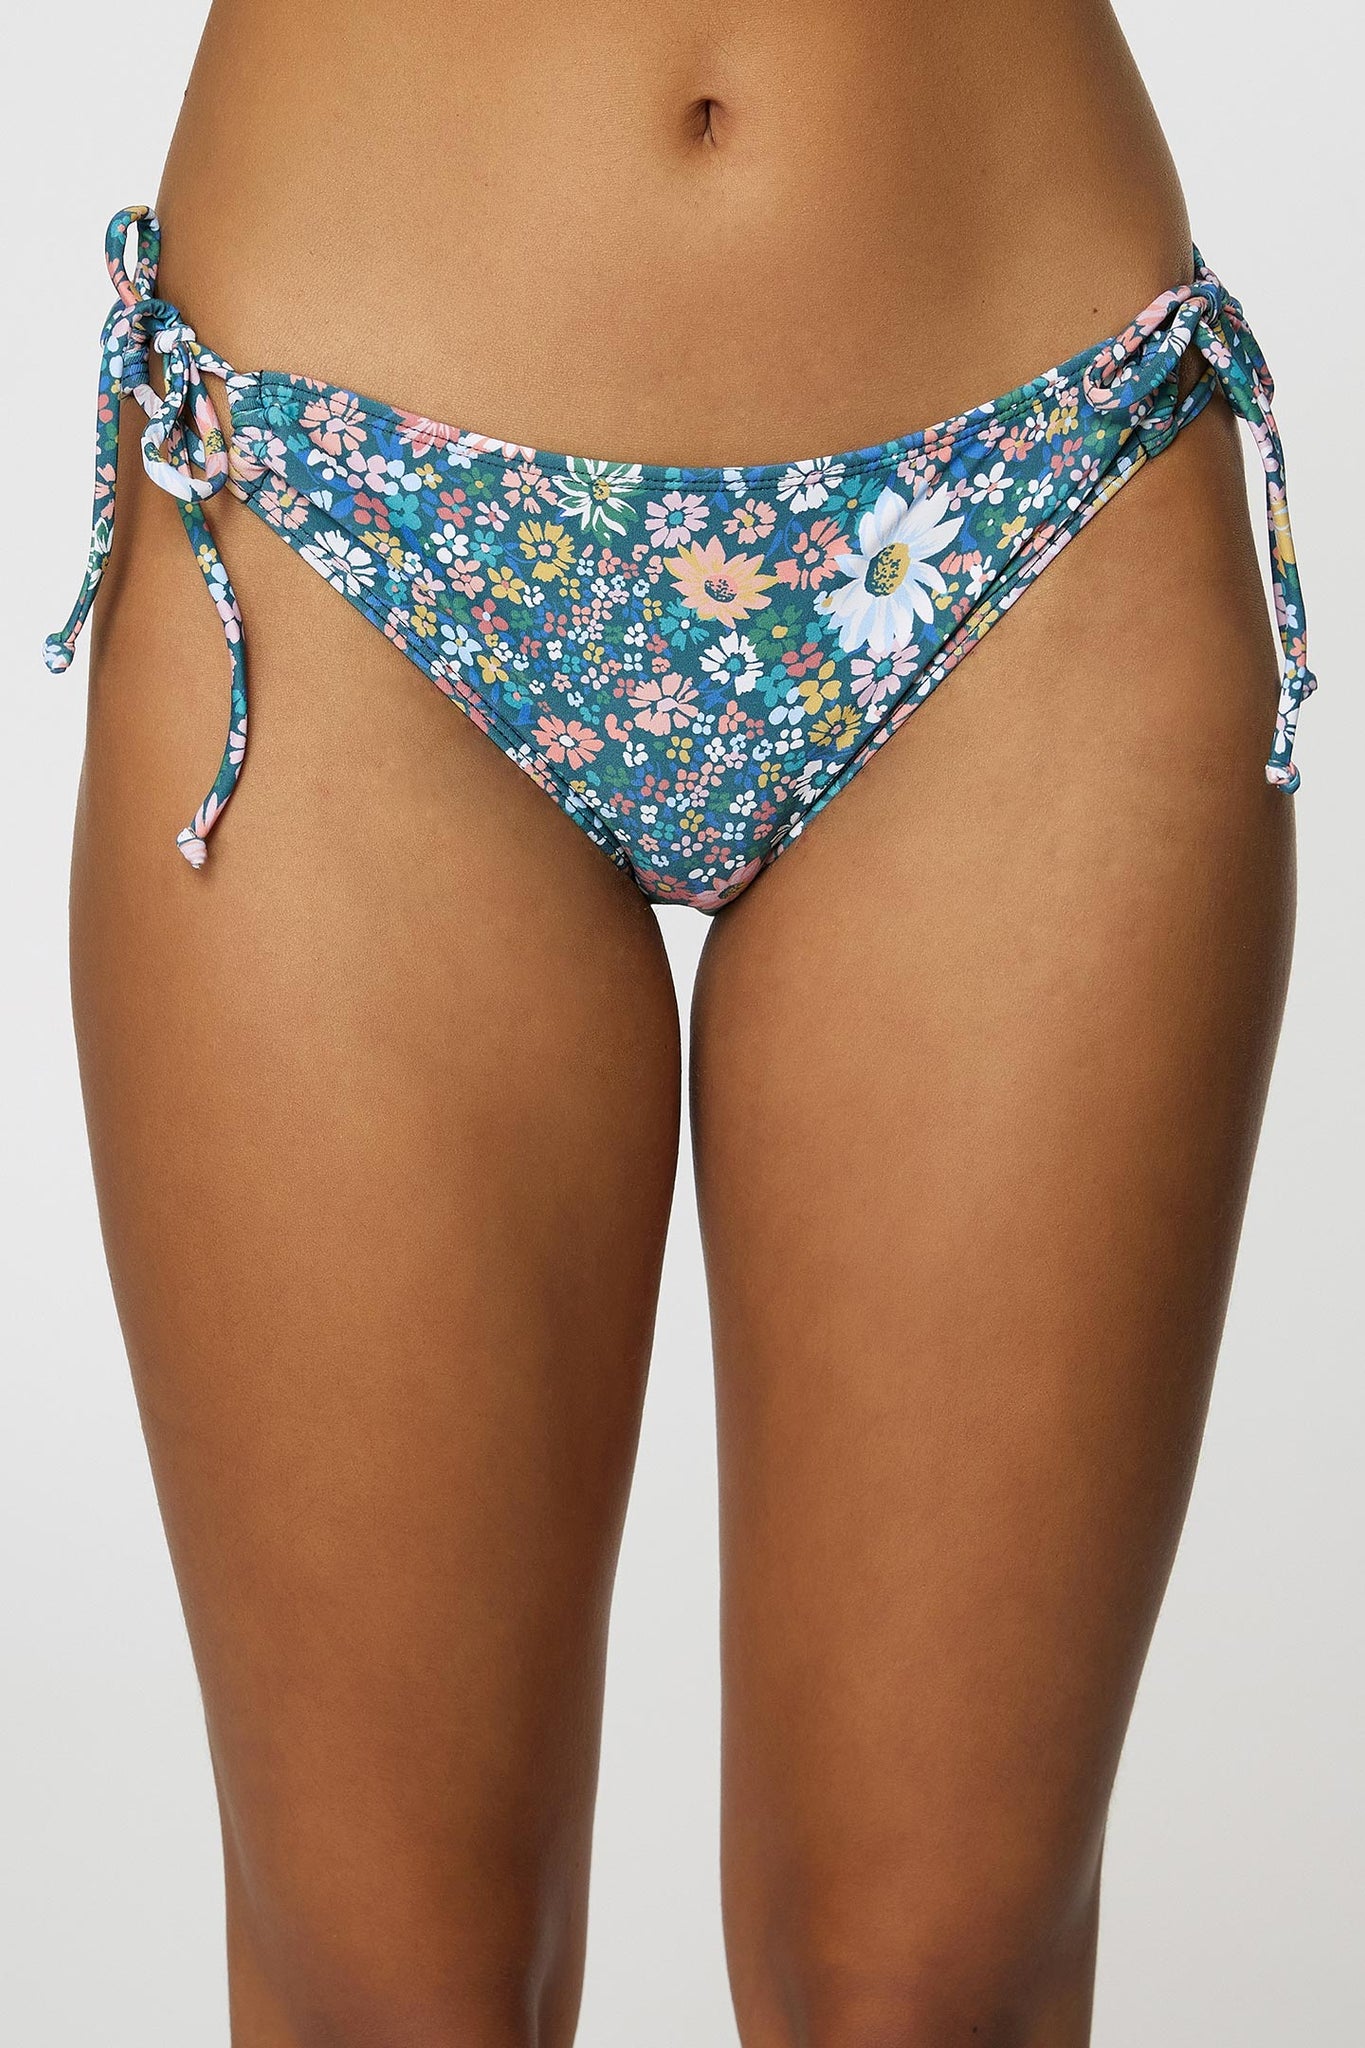 LPT: Ladies, when trying on swimsuit bottoms, make sure the fabrics tight  around the bum. The fabric will stretch a half size bigger once you get in  the water (the classic baggy